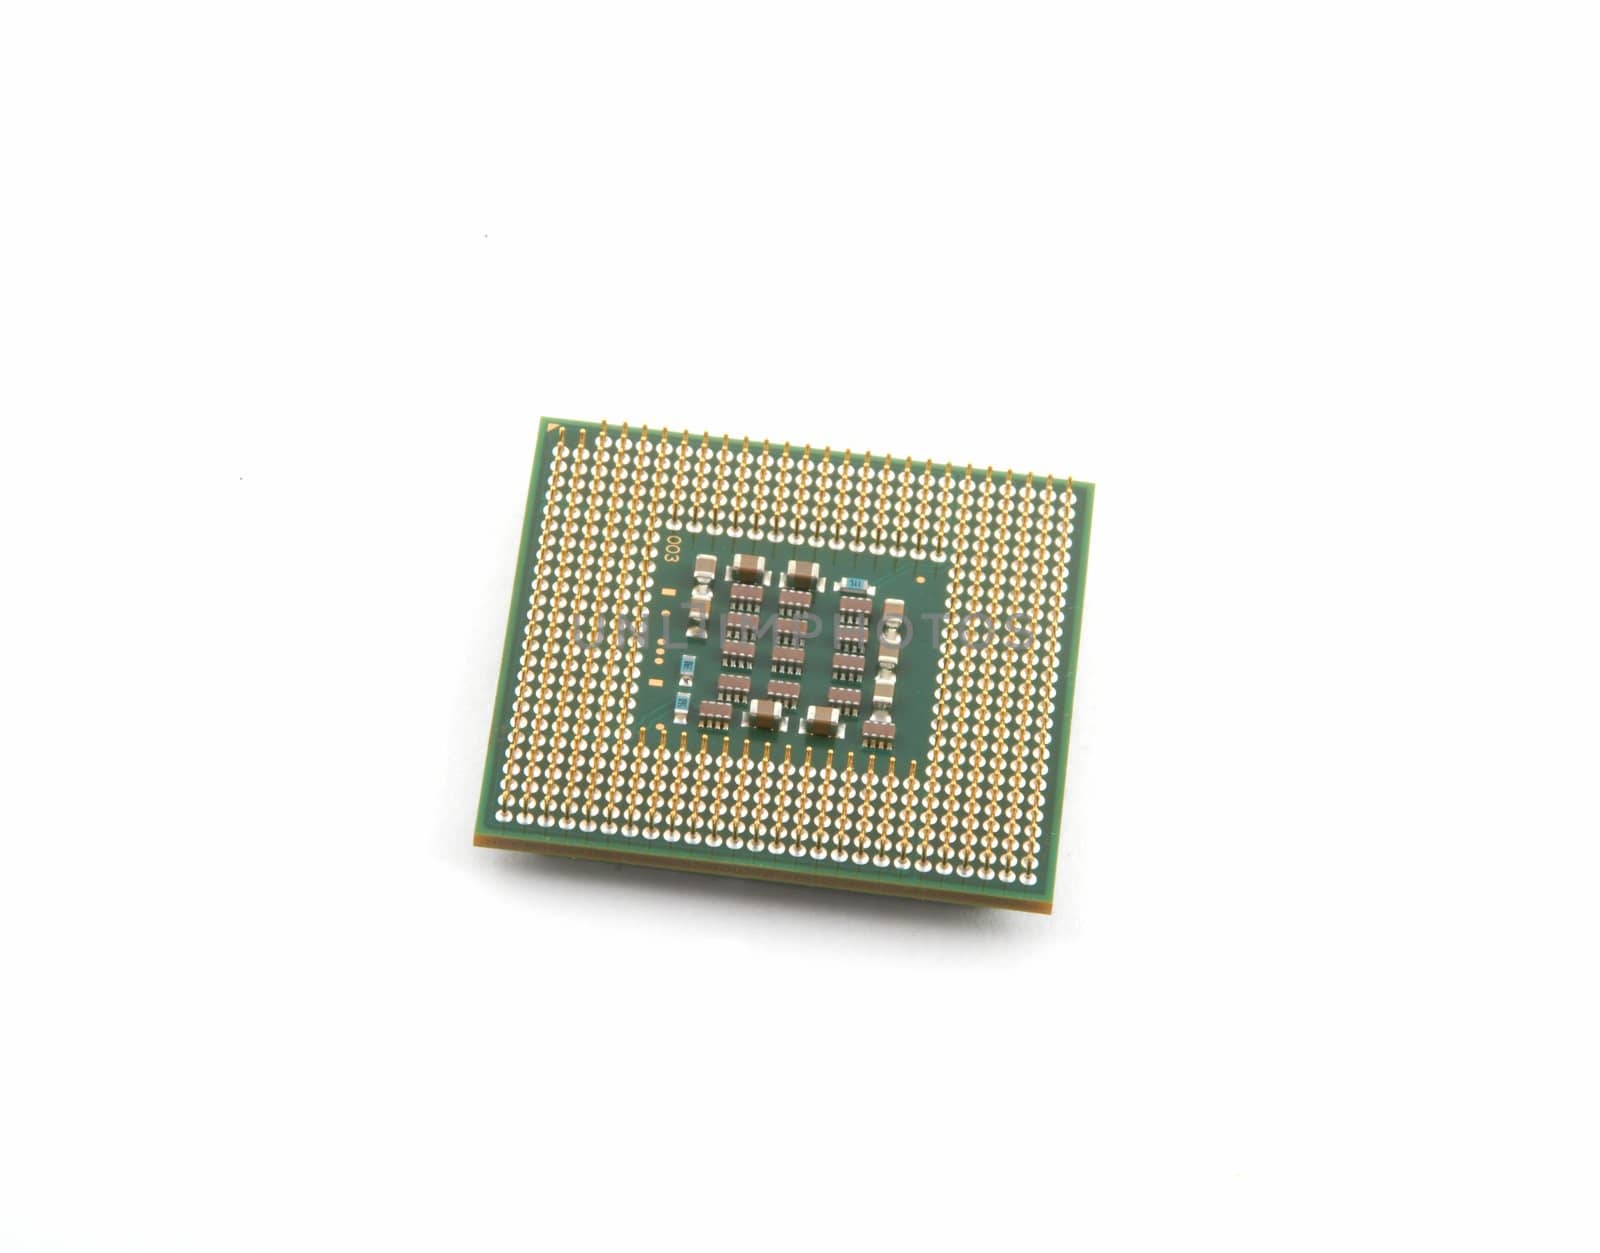 The microprocessor on a white background